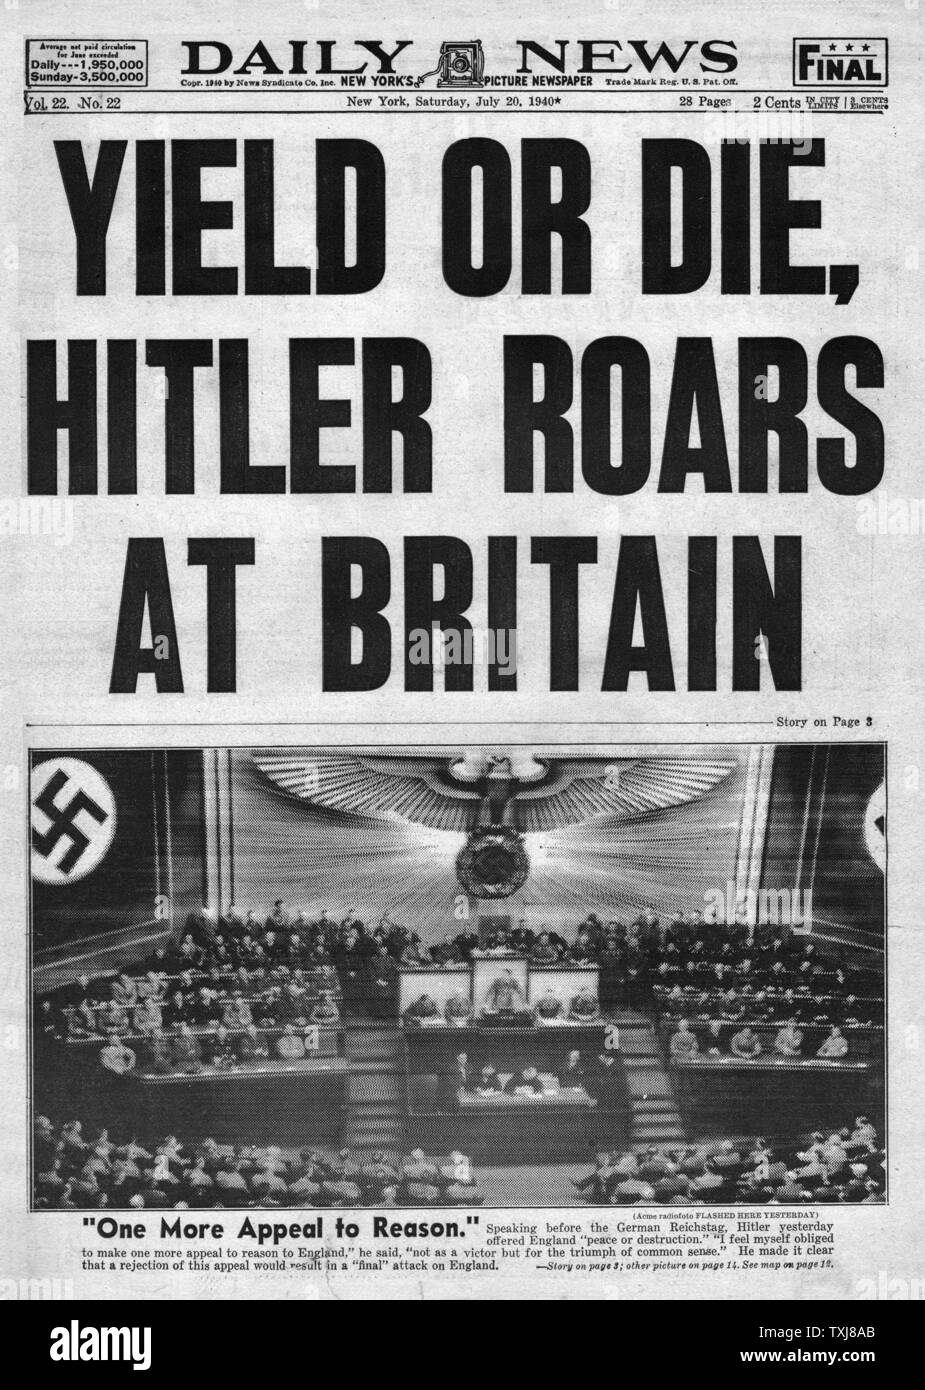 1940 Daily News Adolf Hitler's Appeal to Reason speech at Reichstag (2nd Edition) Stock Photo